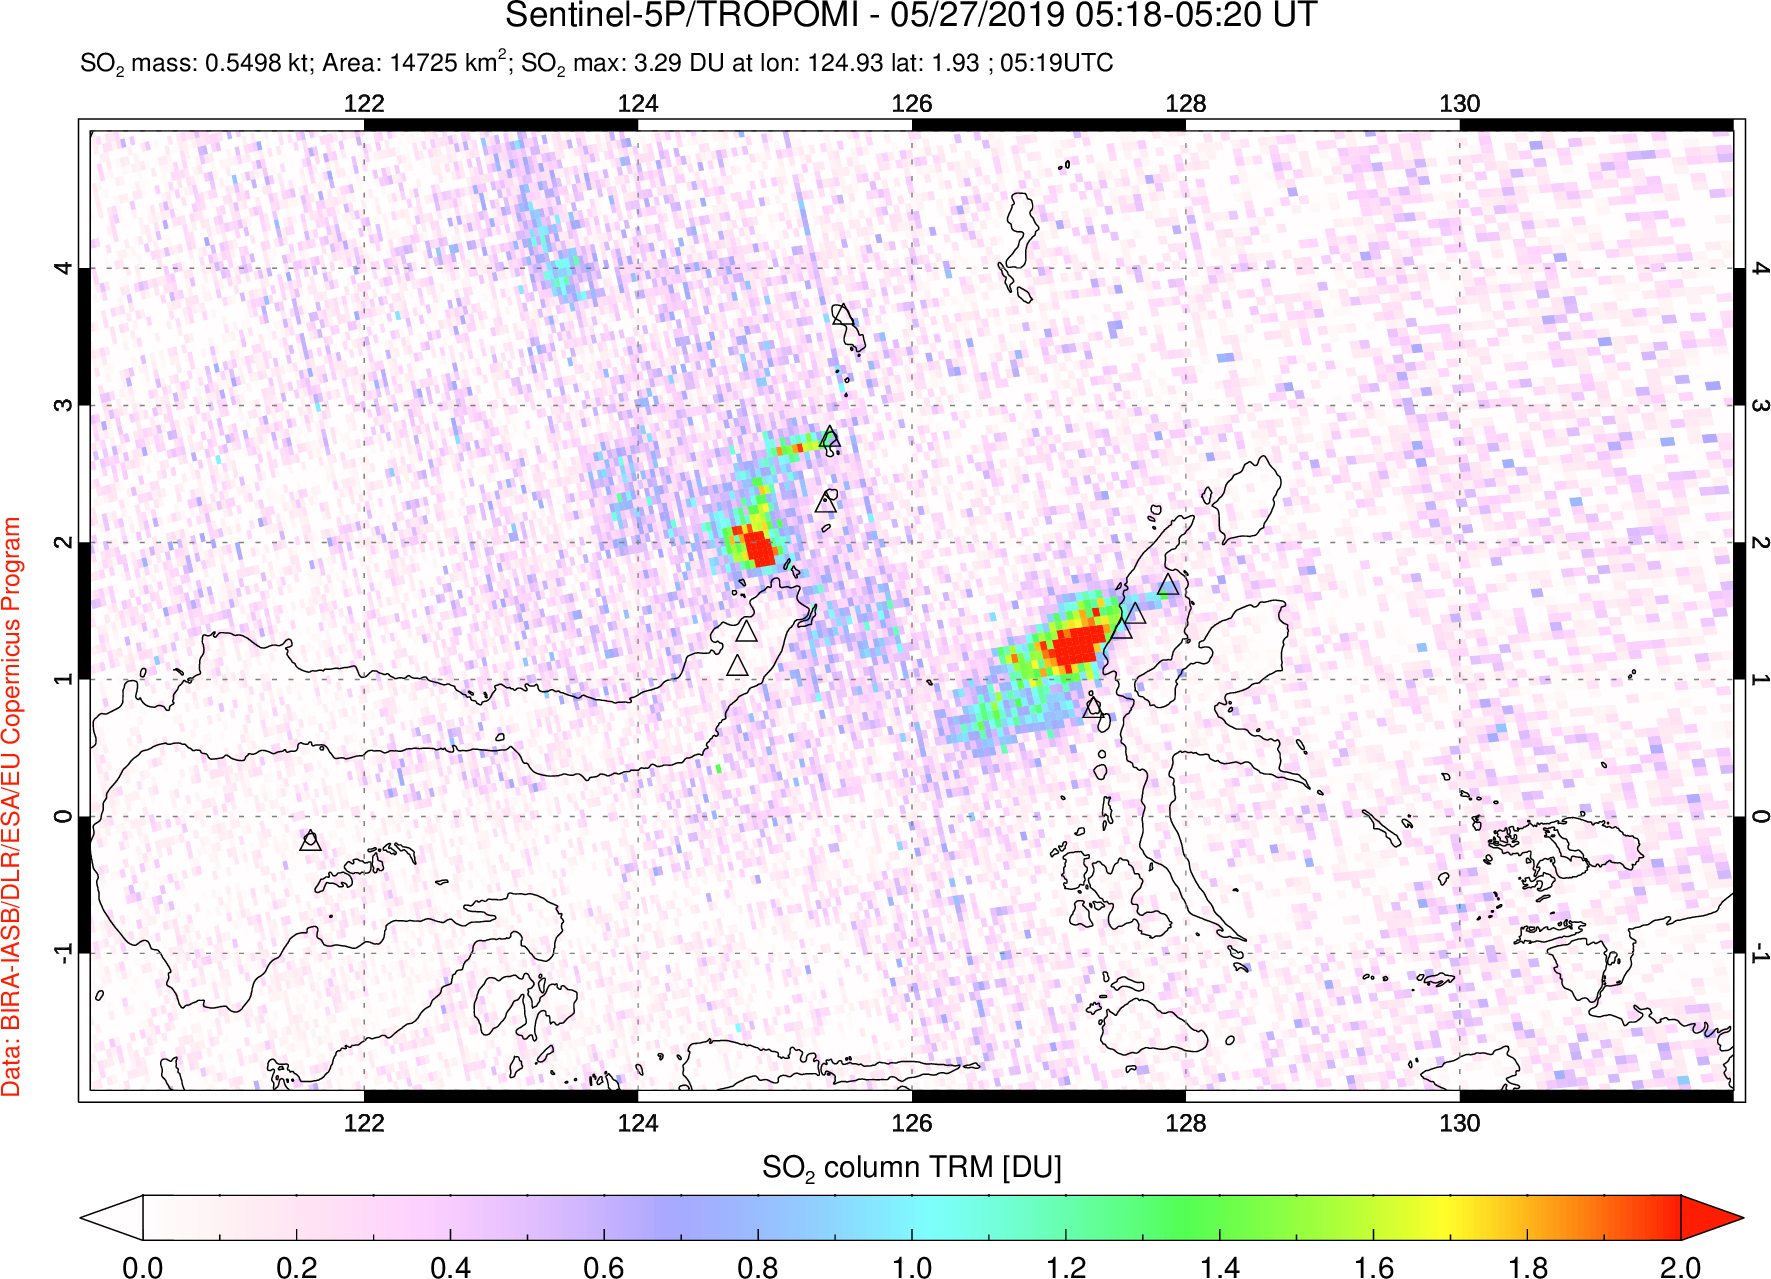 A sulfur dioxide image over Northern Sulawesi & Halmahera, Indonesia on May 27, 2019.